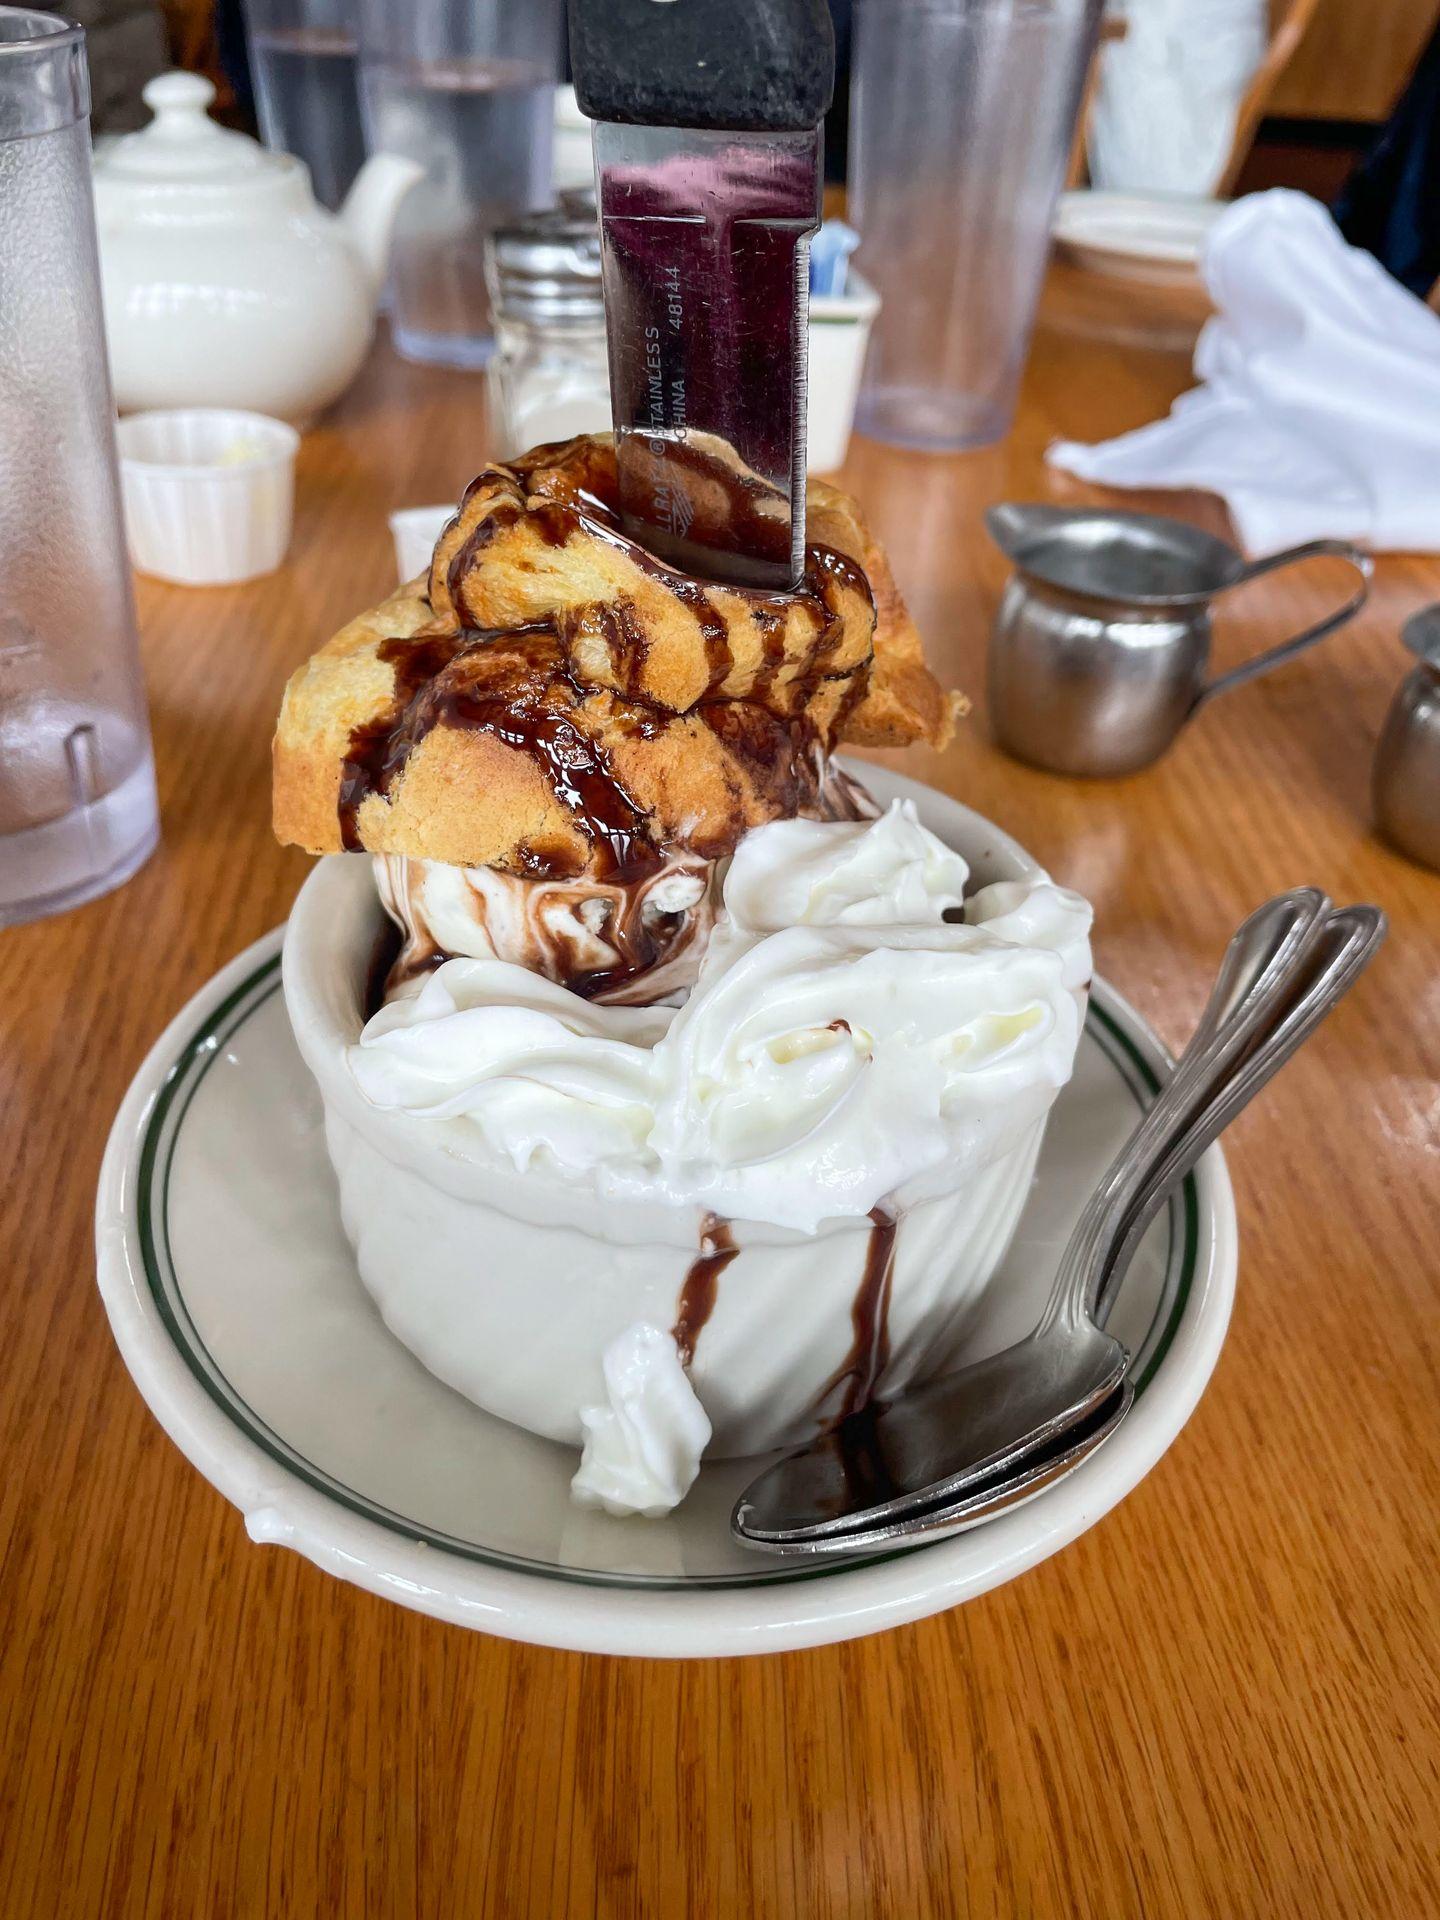 An ice cream sundae inside of a popover that has been cut open.